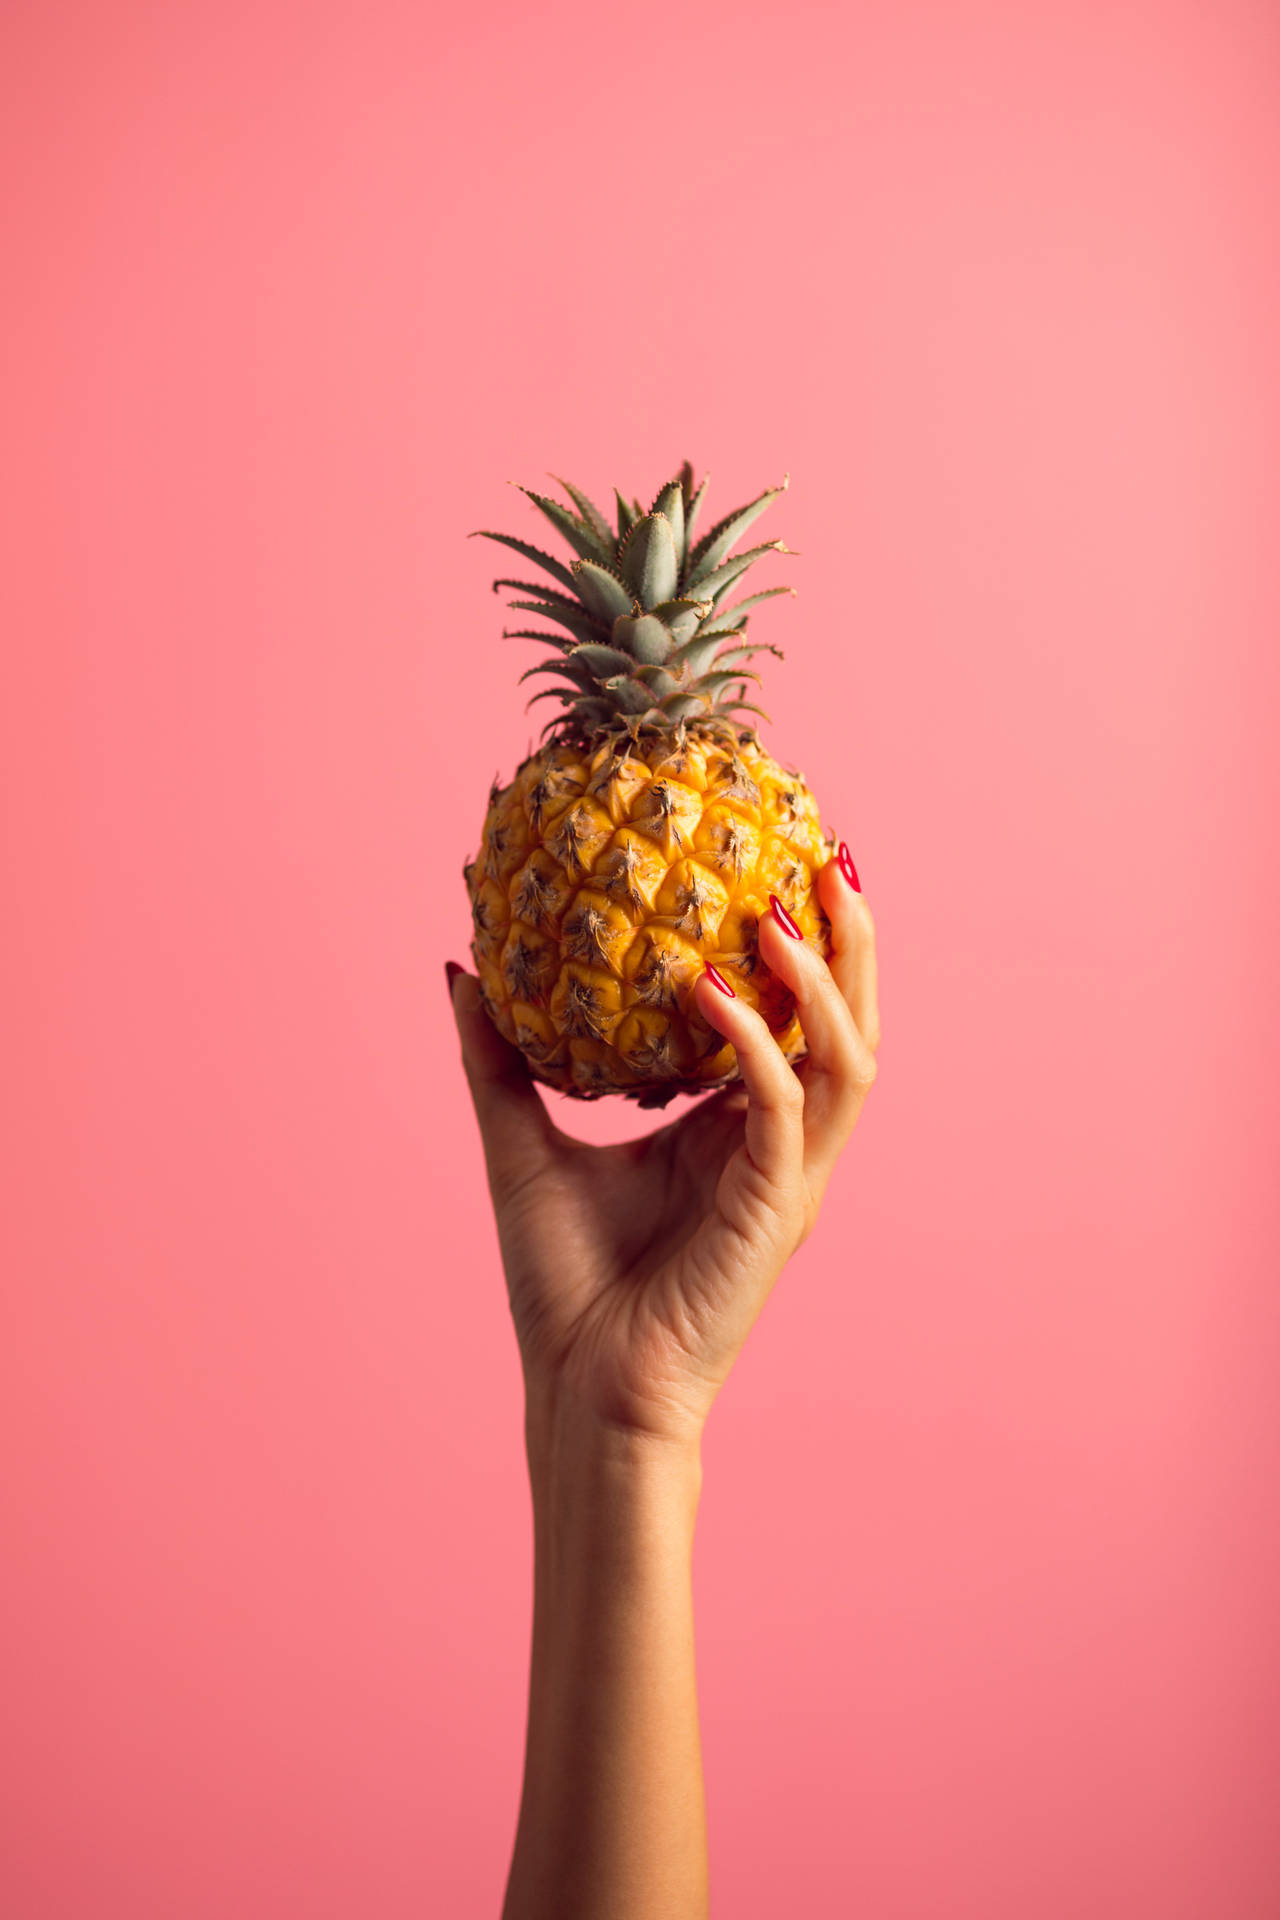 Small Pineapple On Pink Background